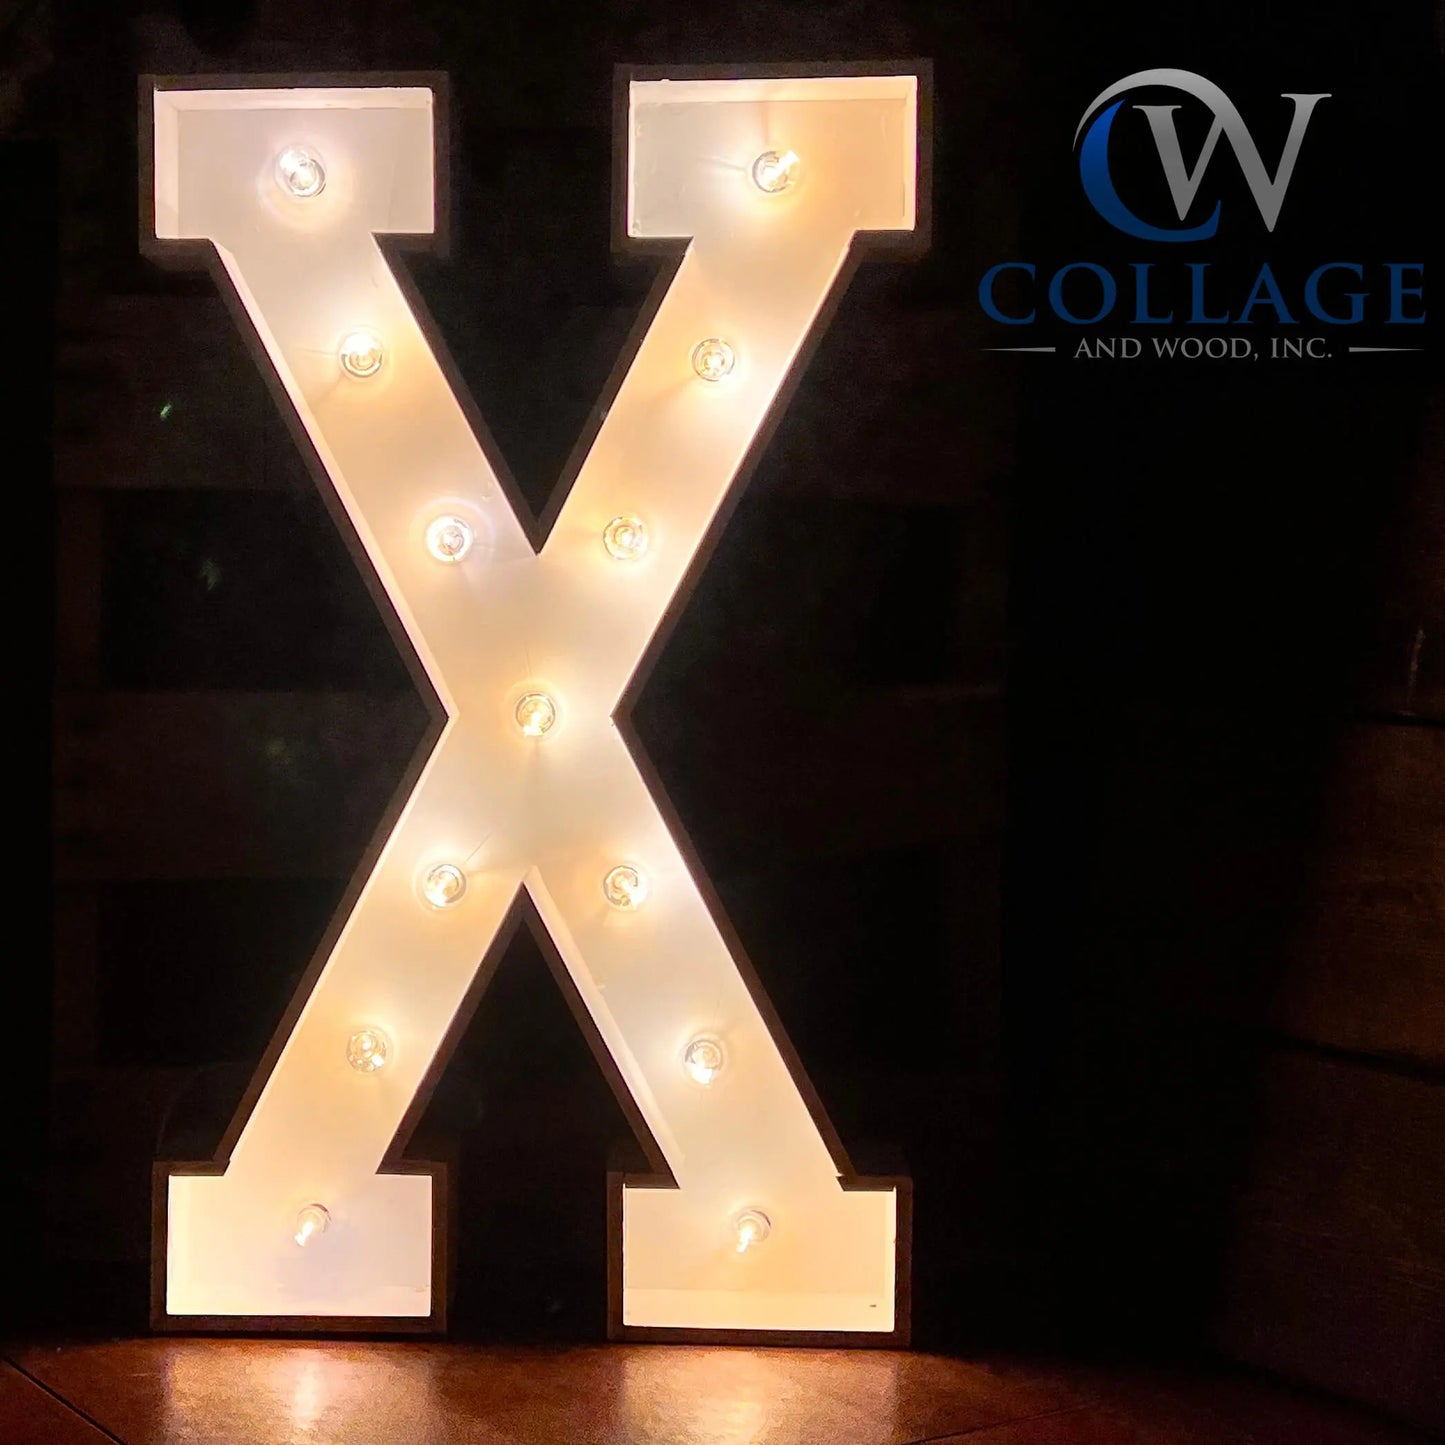 Exemplary wooden marquee letter X, stretching 3 feet tall, finished in a smooth white hue, illuminated by vibrant LED lights.